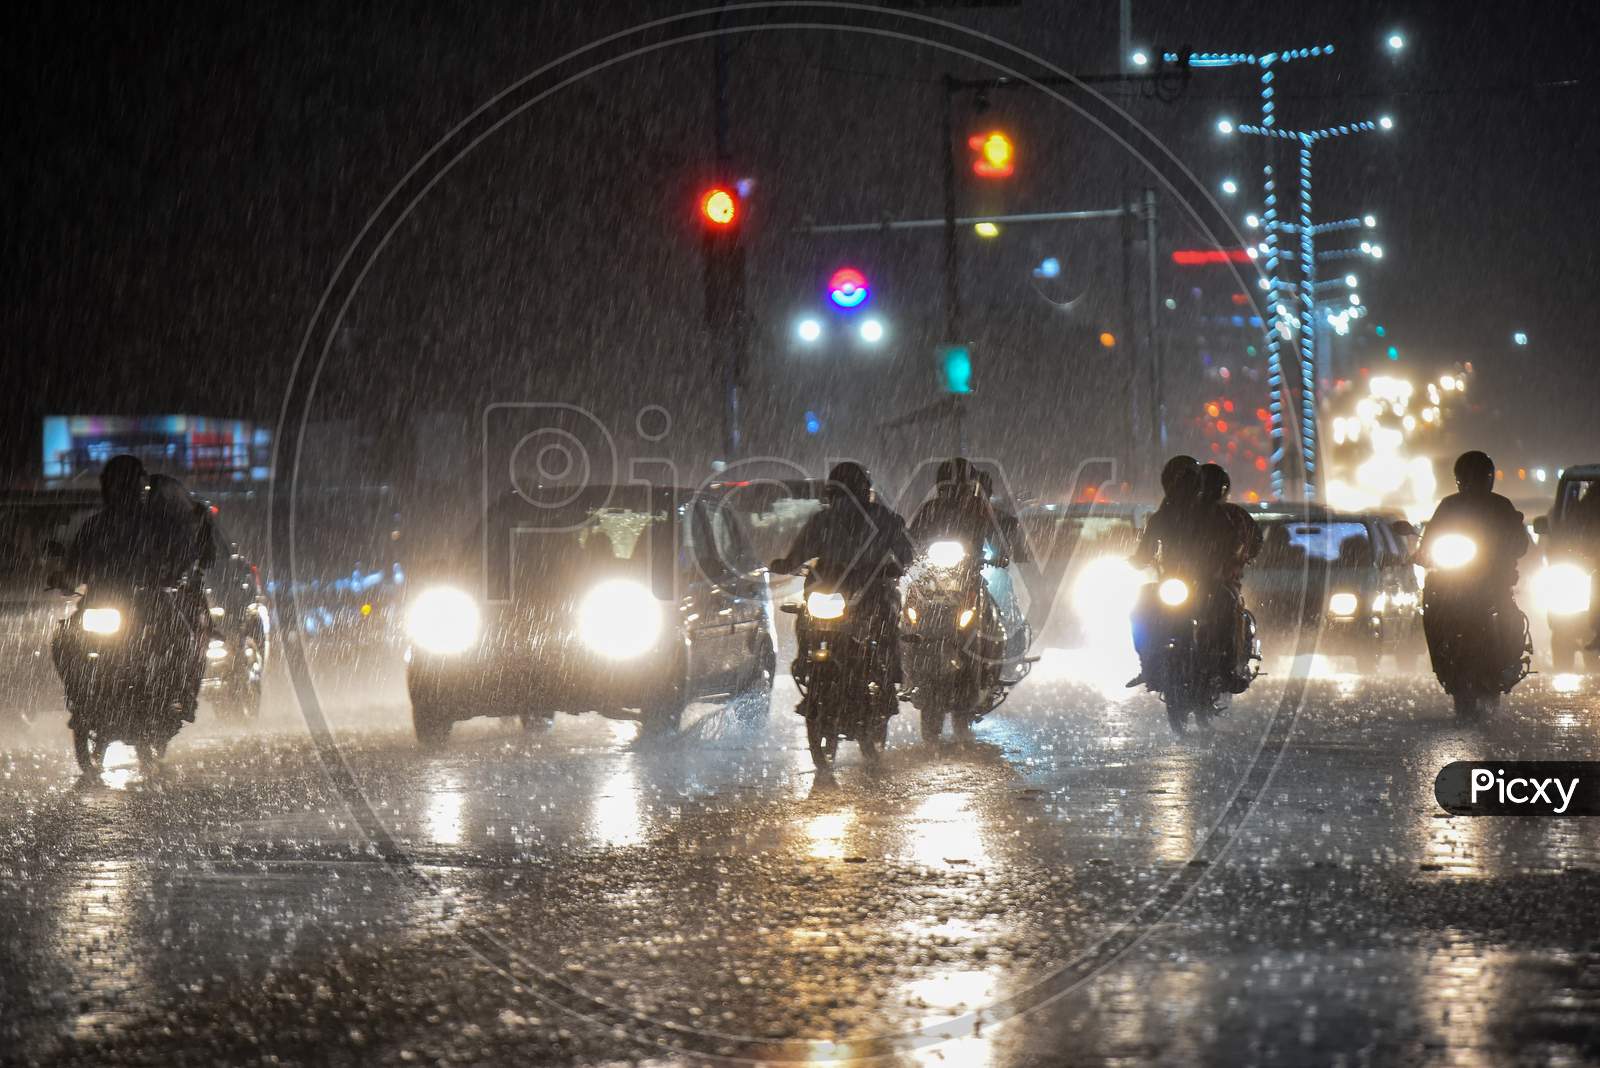 Vehicles move on road as it rains heavily in Hyderabad on September 16,2020